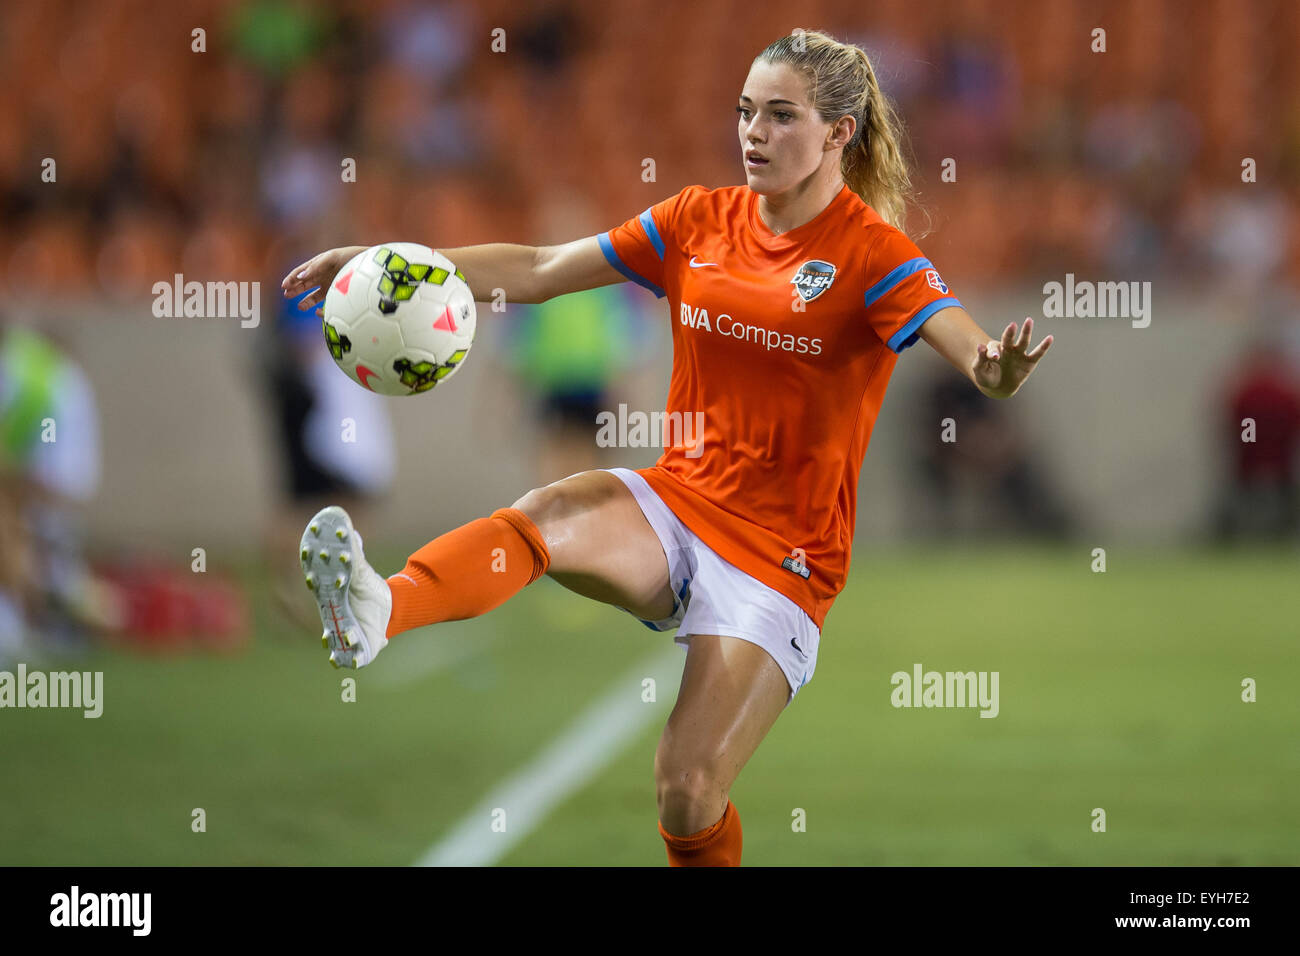 Houston, Texas, USA. 29th July, 2015. Houston Dash forward Kealia Ohai (7) controls the ball during the 2nd half of an NWSL game between the Houston Dash and FC Kansas City at BBVA Compass Stadium in Houston, TX on July 29th, 2015. The Dash won 3-2. Credit:  Trask Smith/ZUMA Wire/Alamy Live News Stock Photo